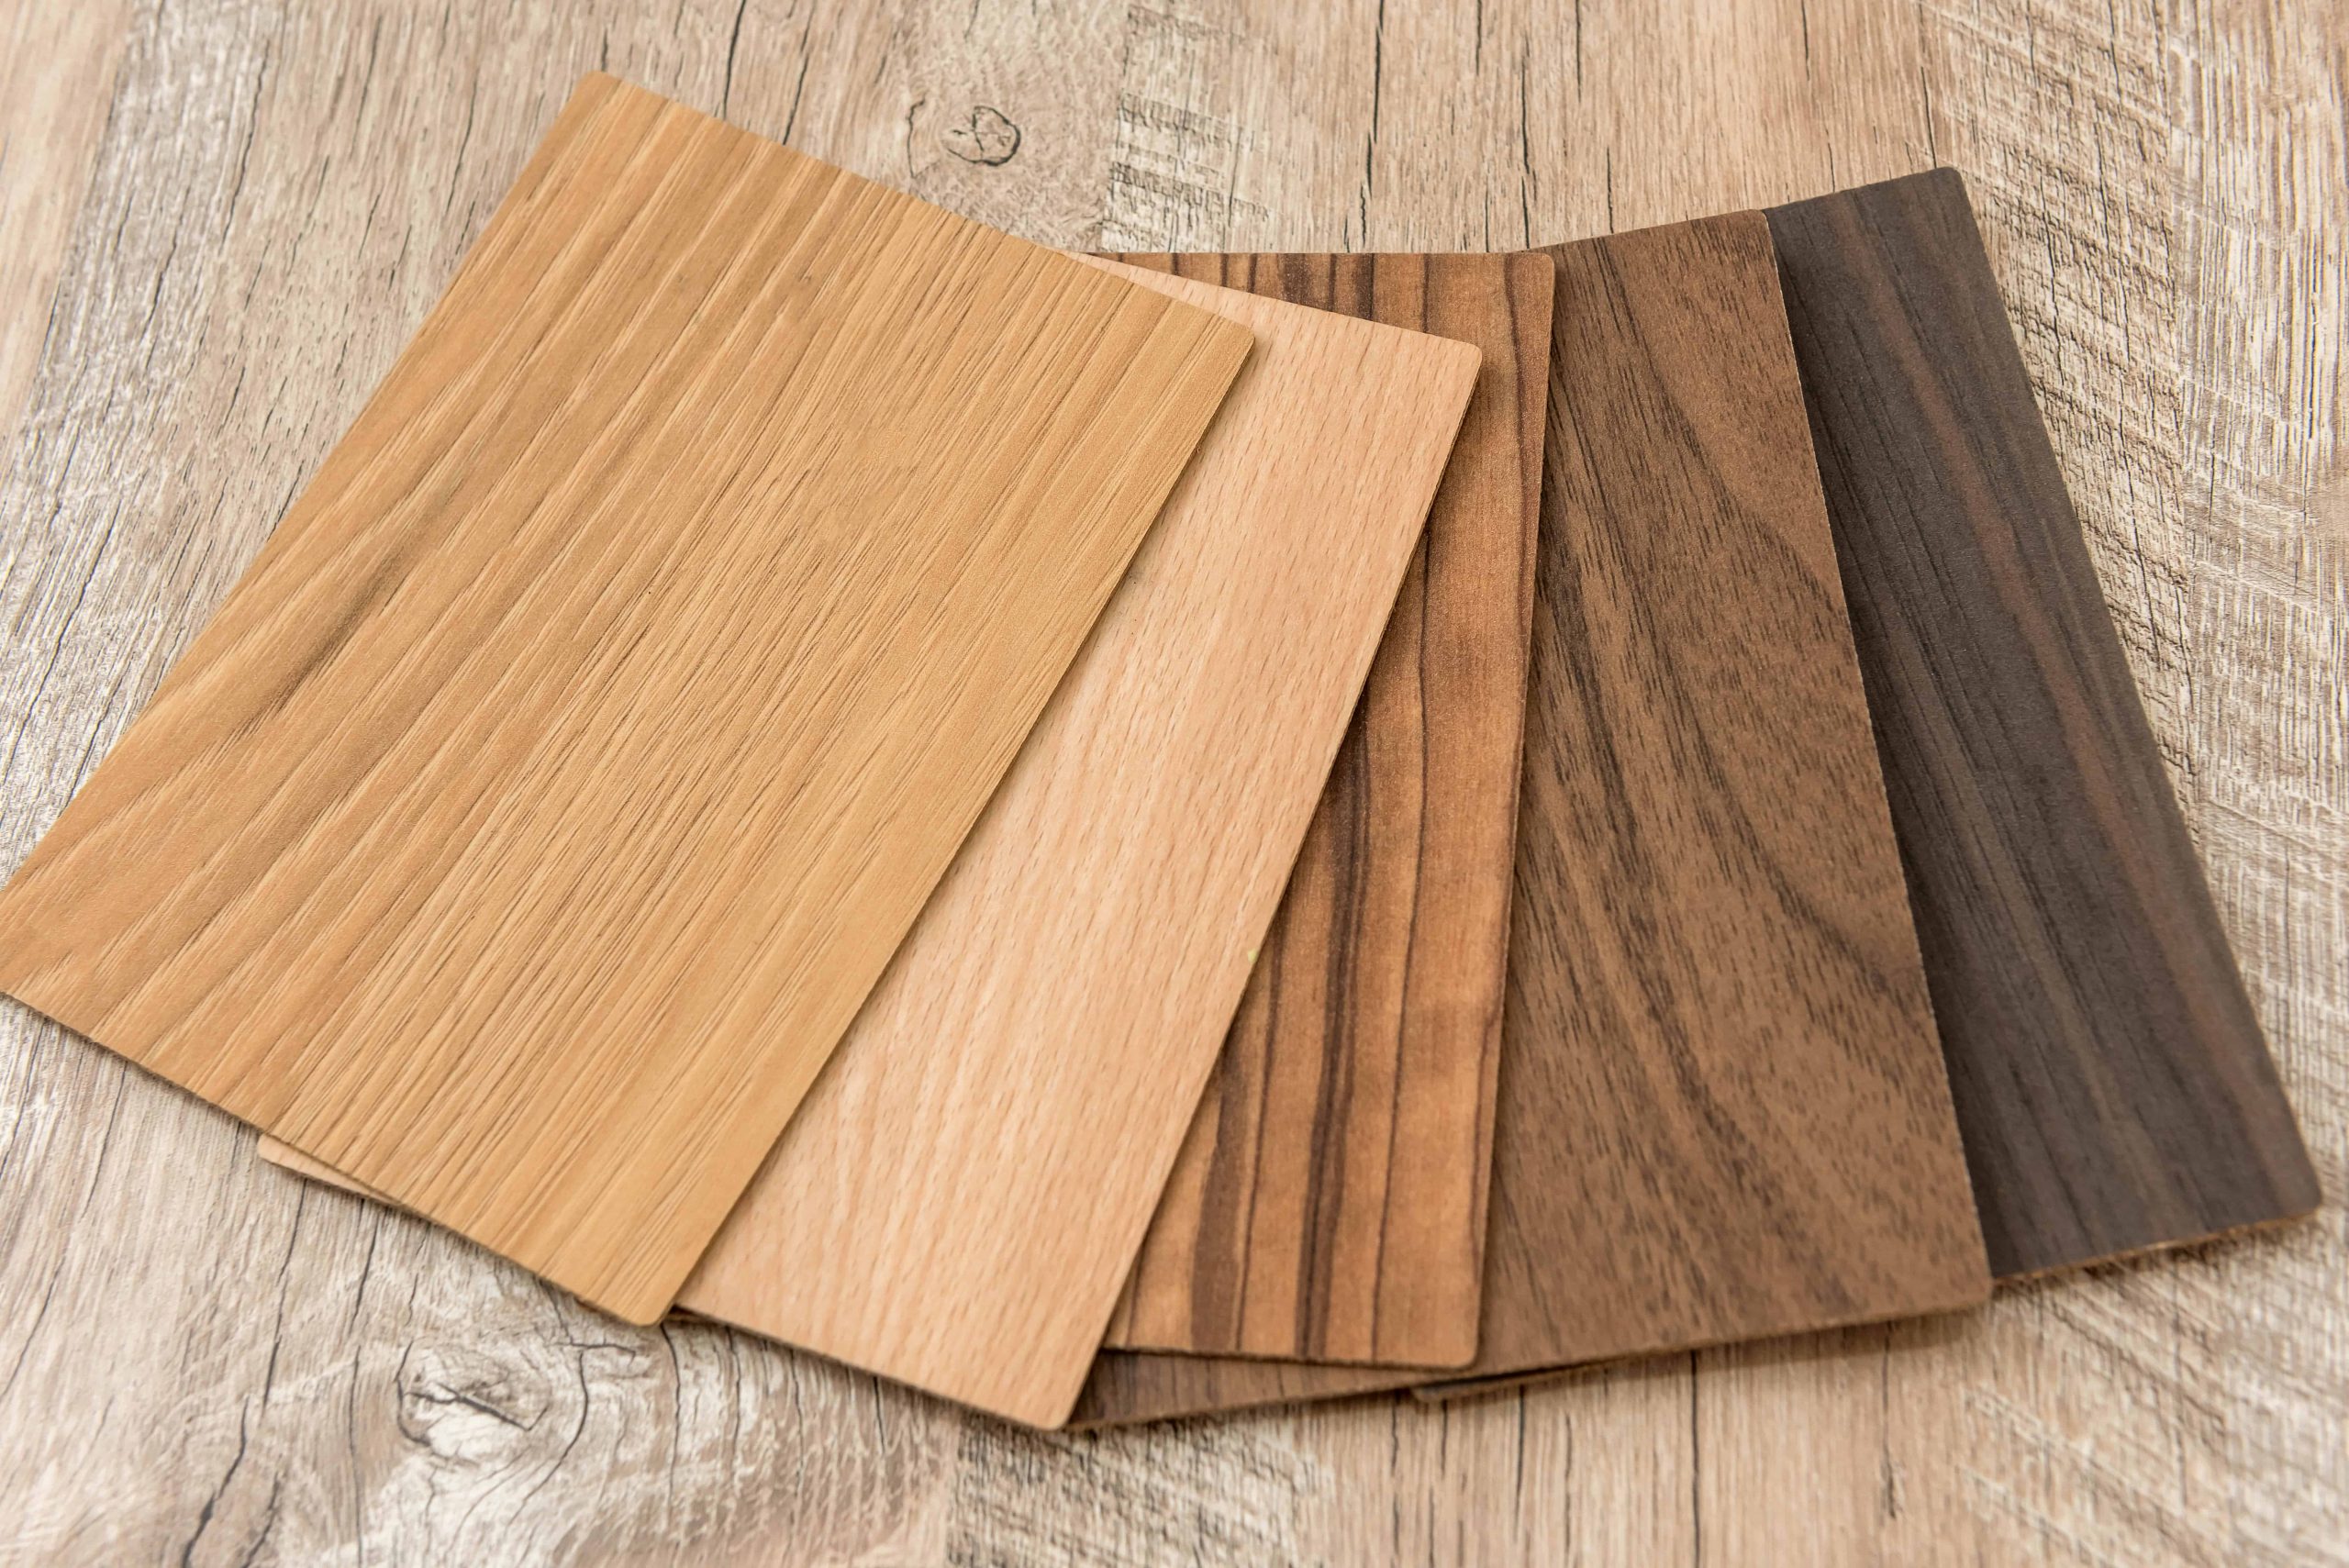 Wigwam Ply: Best plywood for home furniture